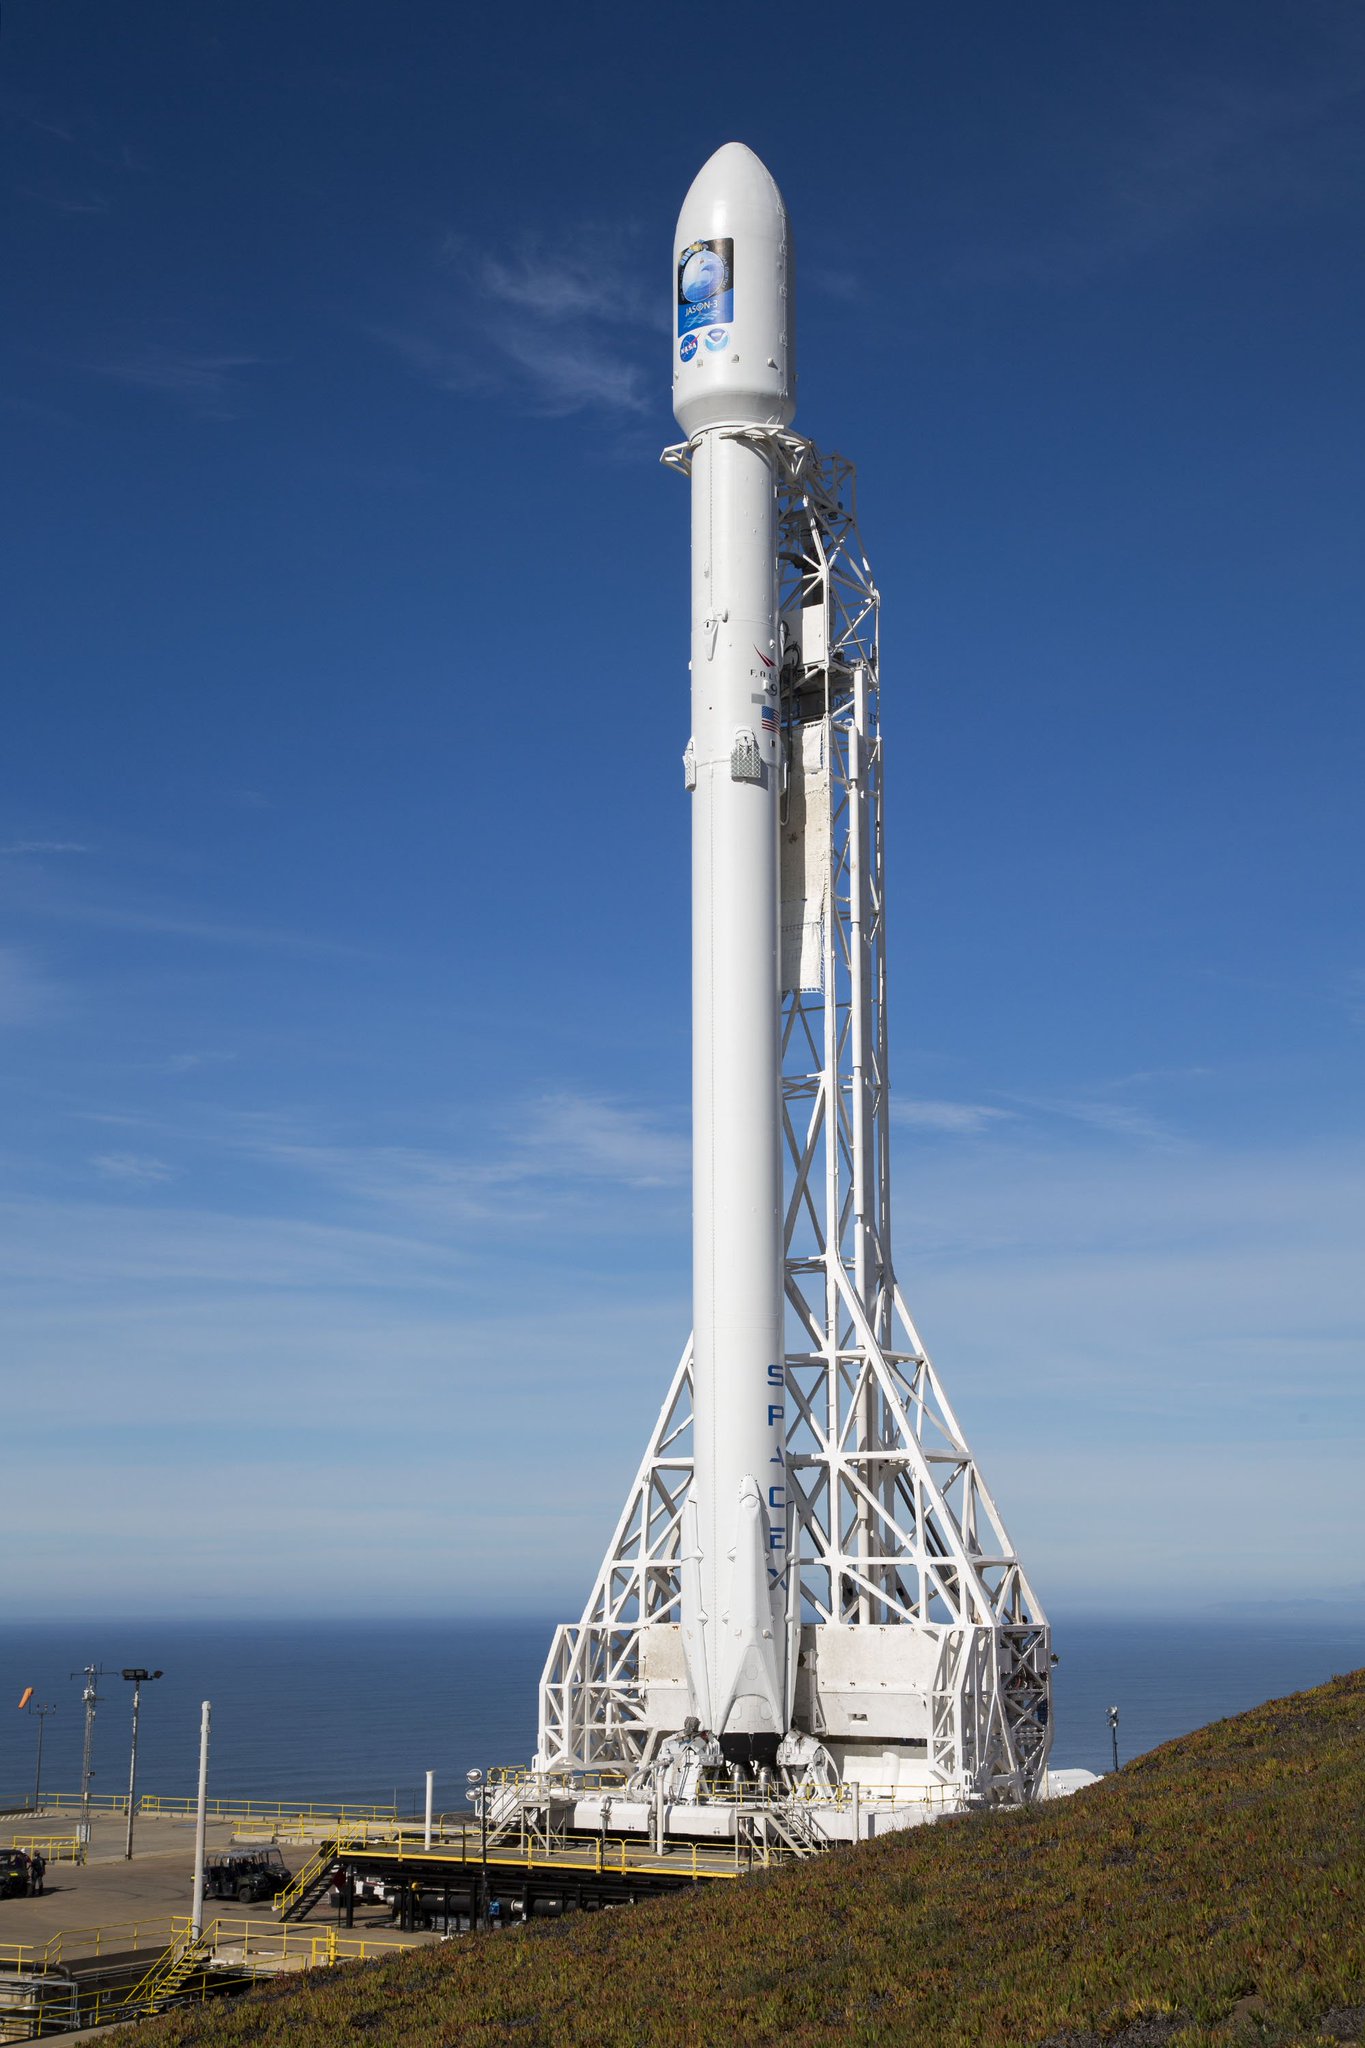 SpaceX on Twitter: "Rocket is vertical in advance of ...
